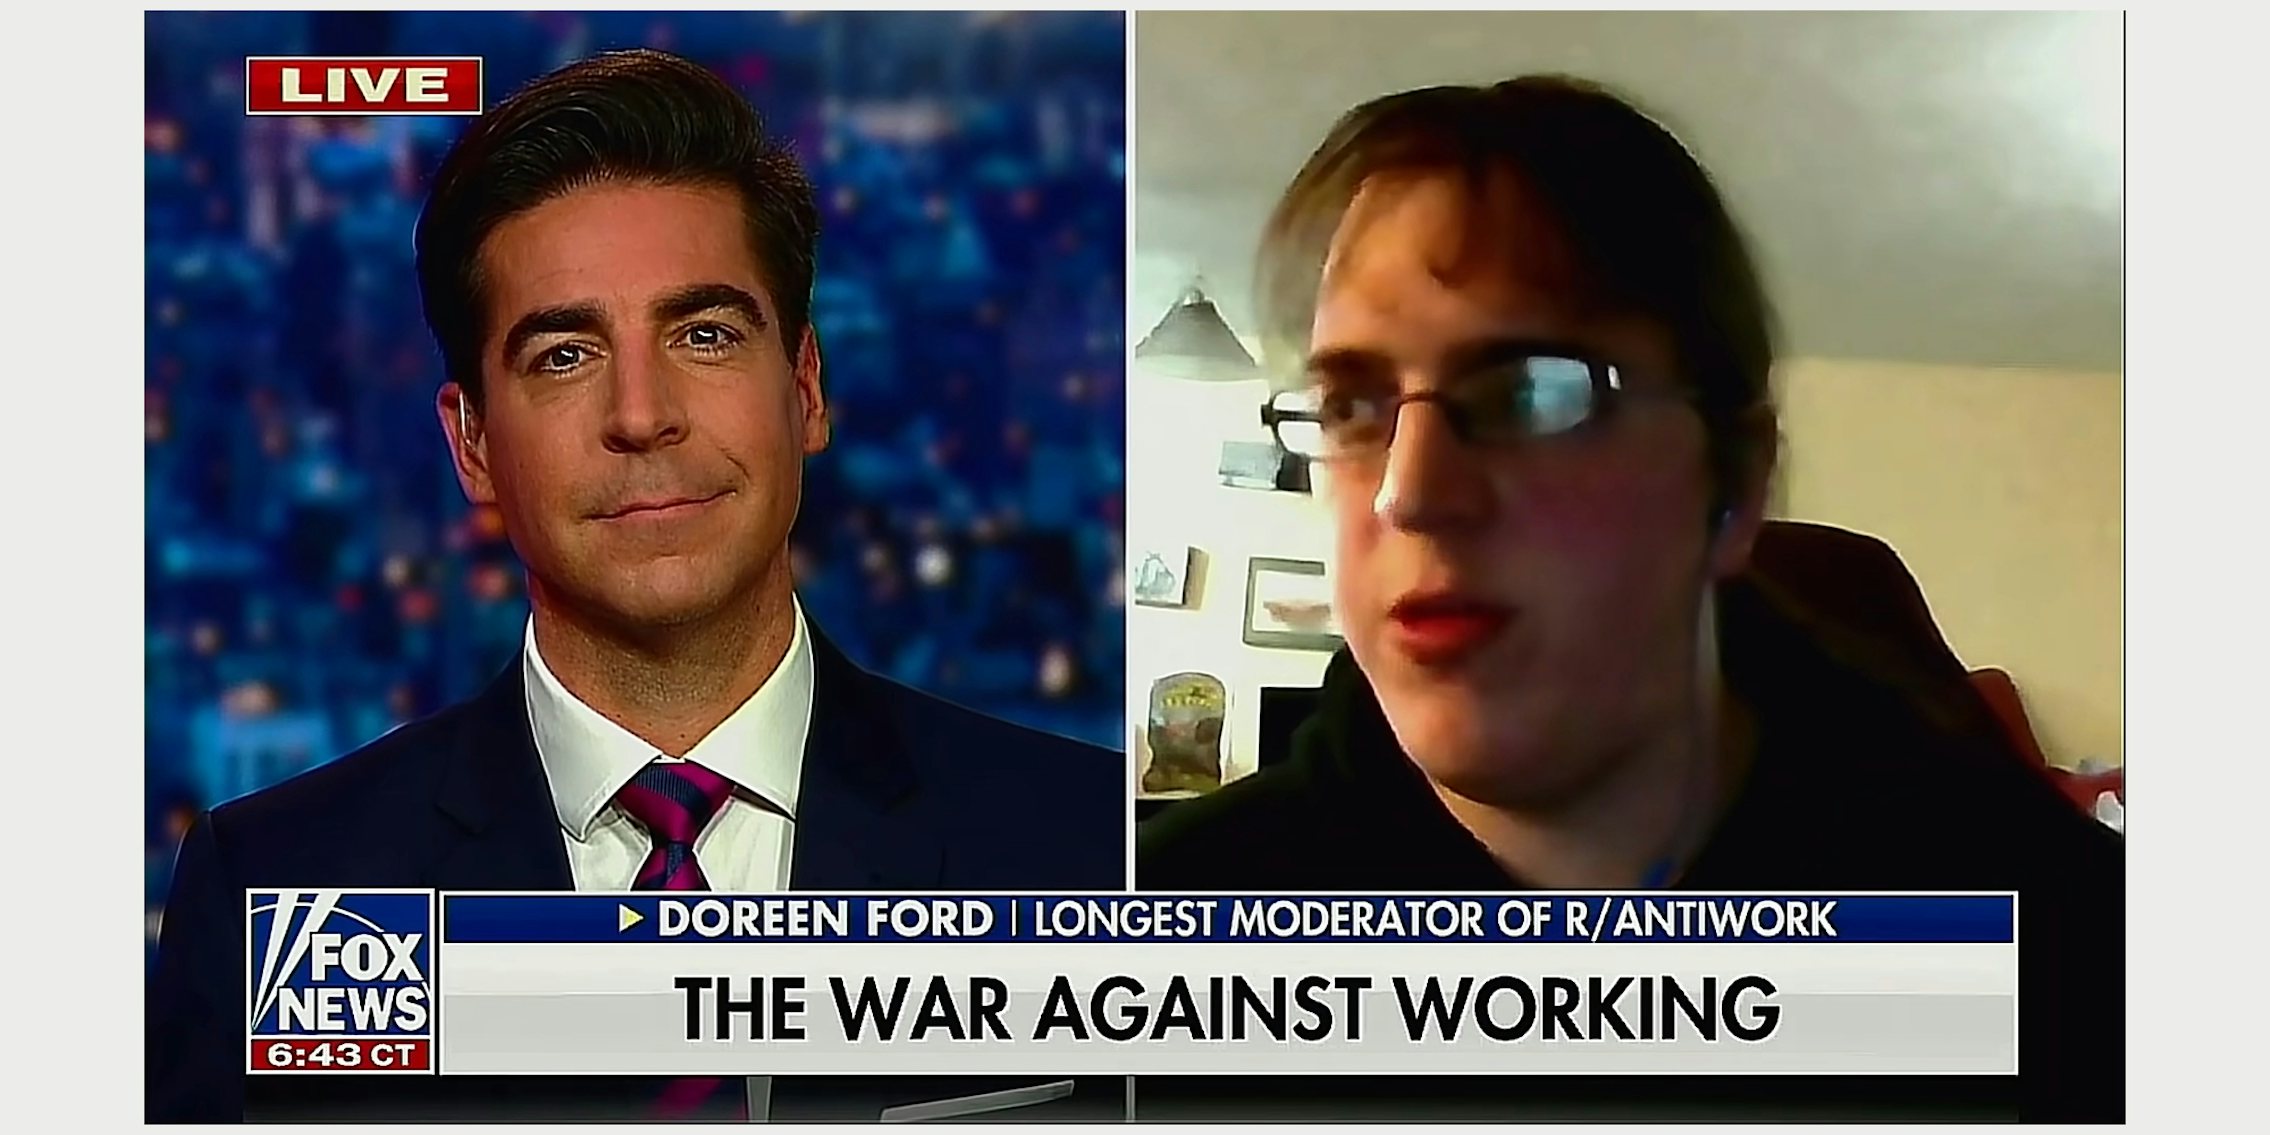 Doreen Ford, moderator of r/antiwork on Fox News with Jesse Watters